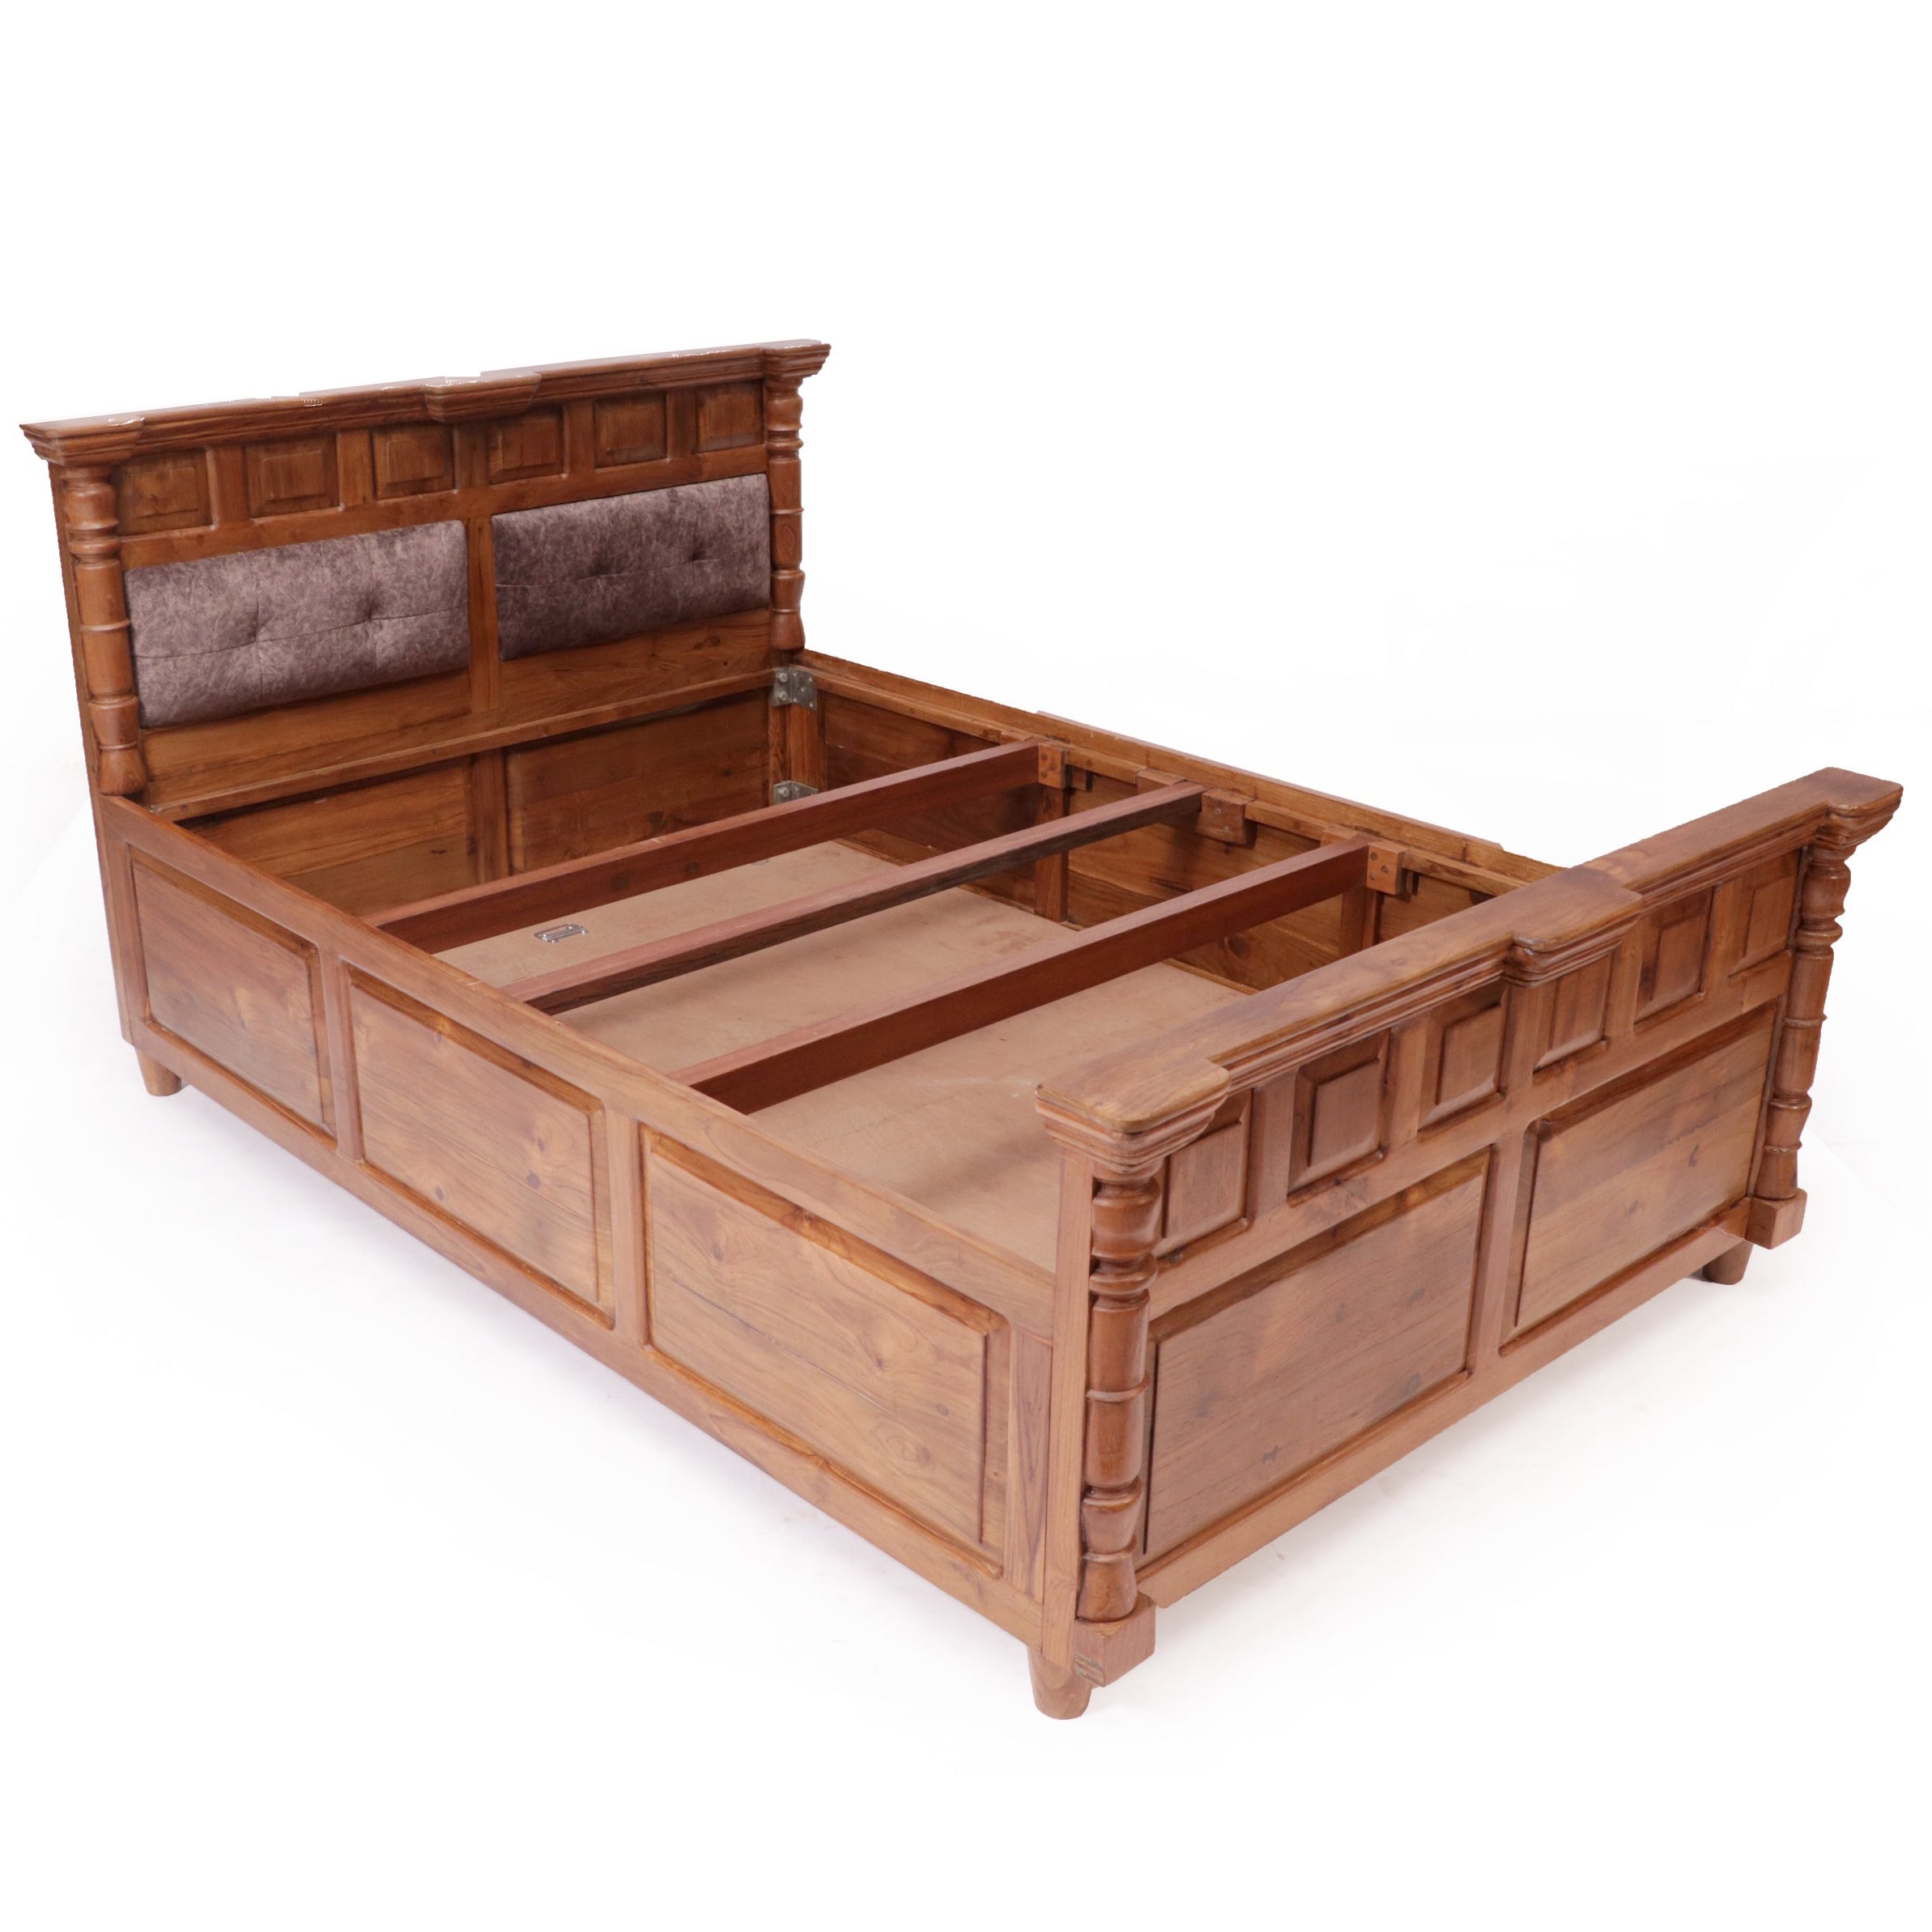 Traditional Linear Double Bed Teak wood Bed